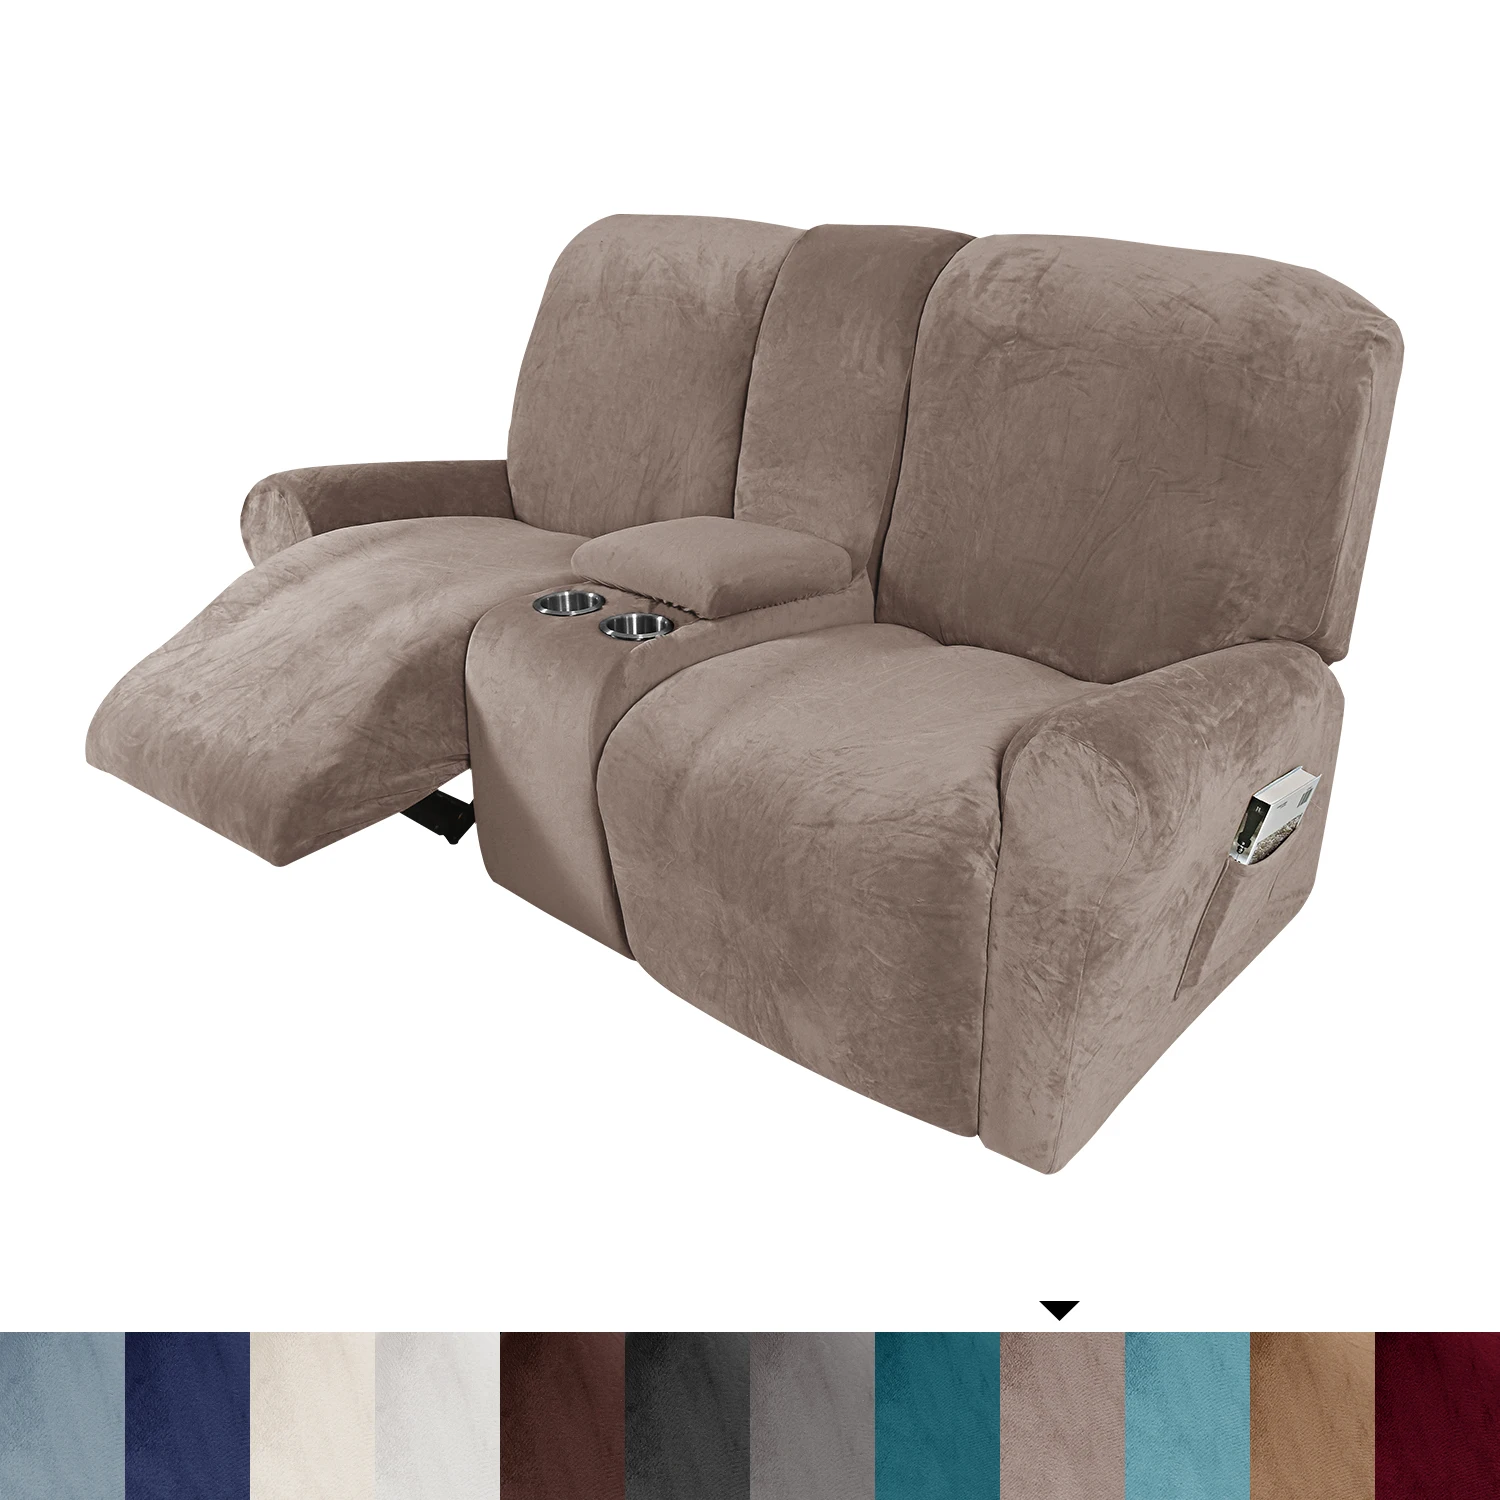 recliner-sofa-covers-2-seater-sofa-covers-with-cup-holder-velvet-stretch-recliner-loveseat-slipcovers-with-middle-console